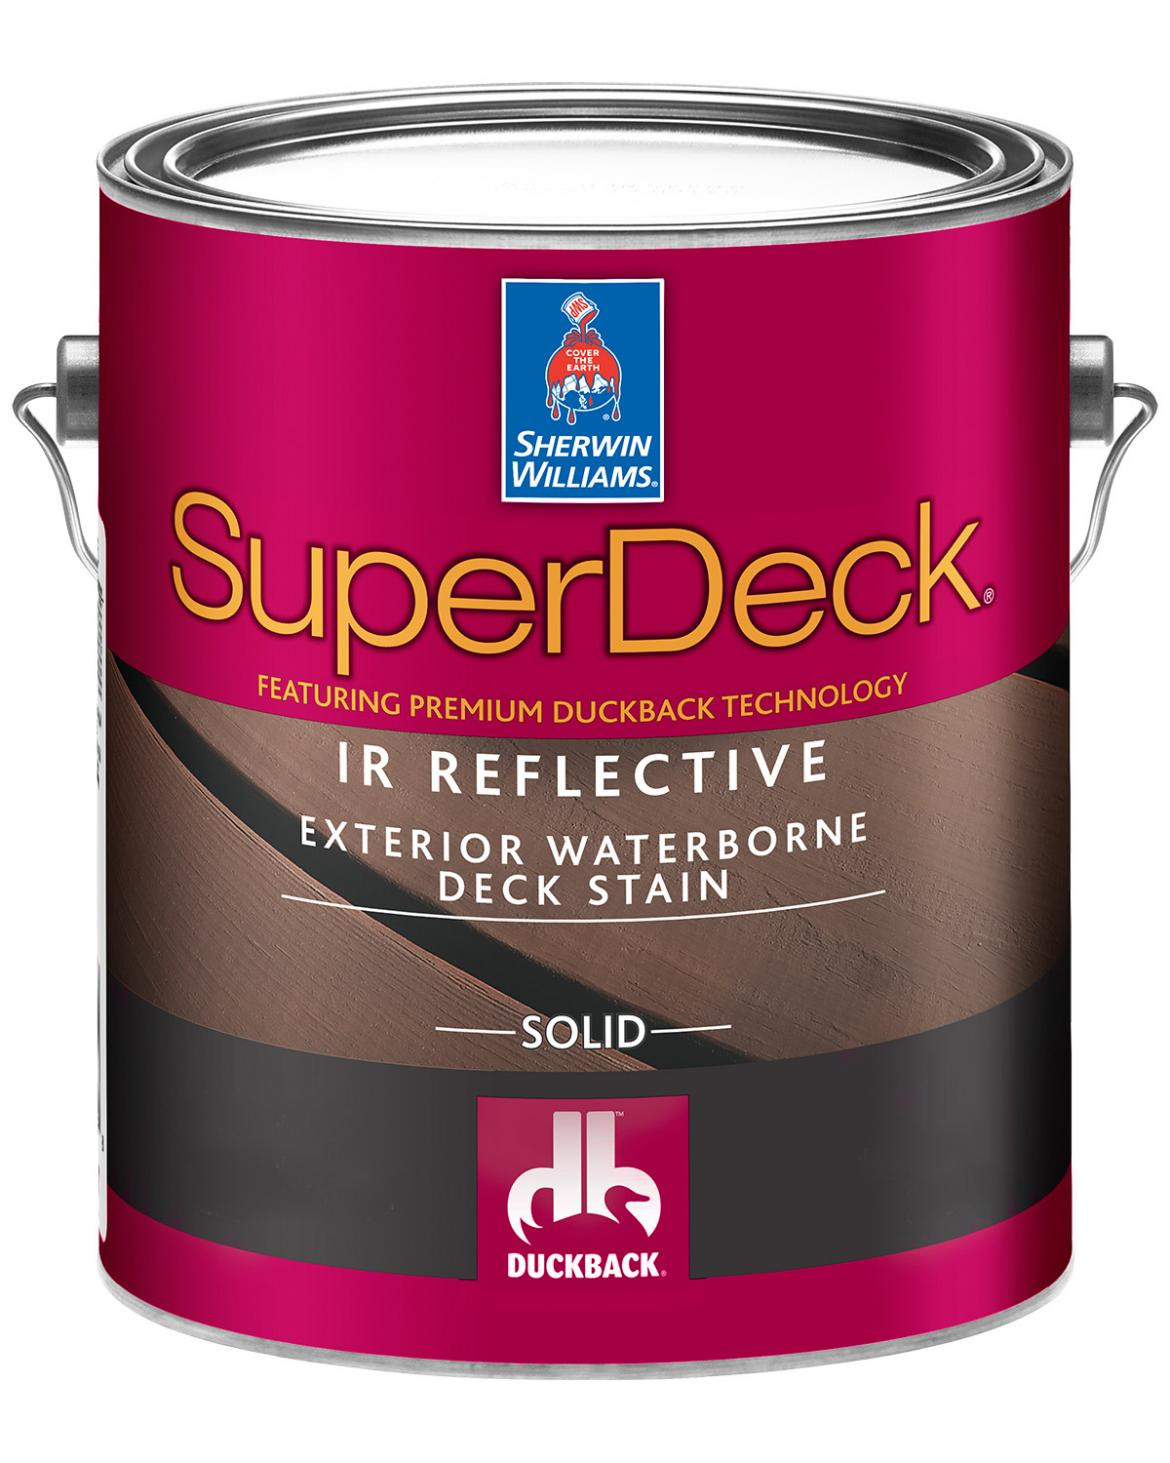 Sherwin Williams Deck Paint
 Sherwin Williams Deck Stain Reduces Surface Temp 20 Degrees